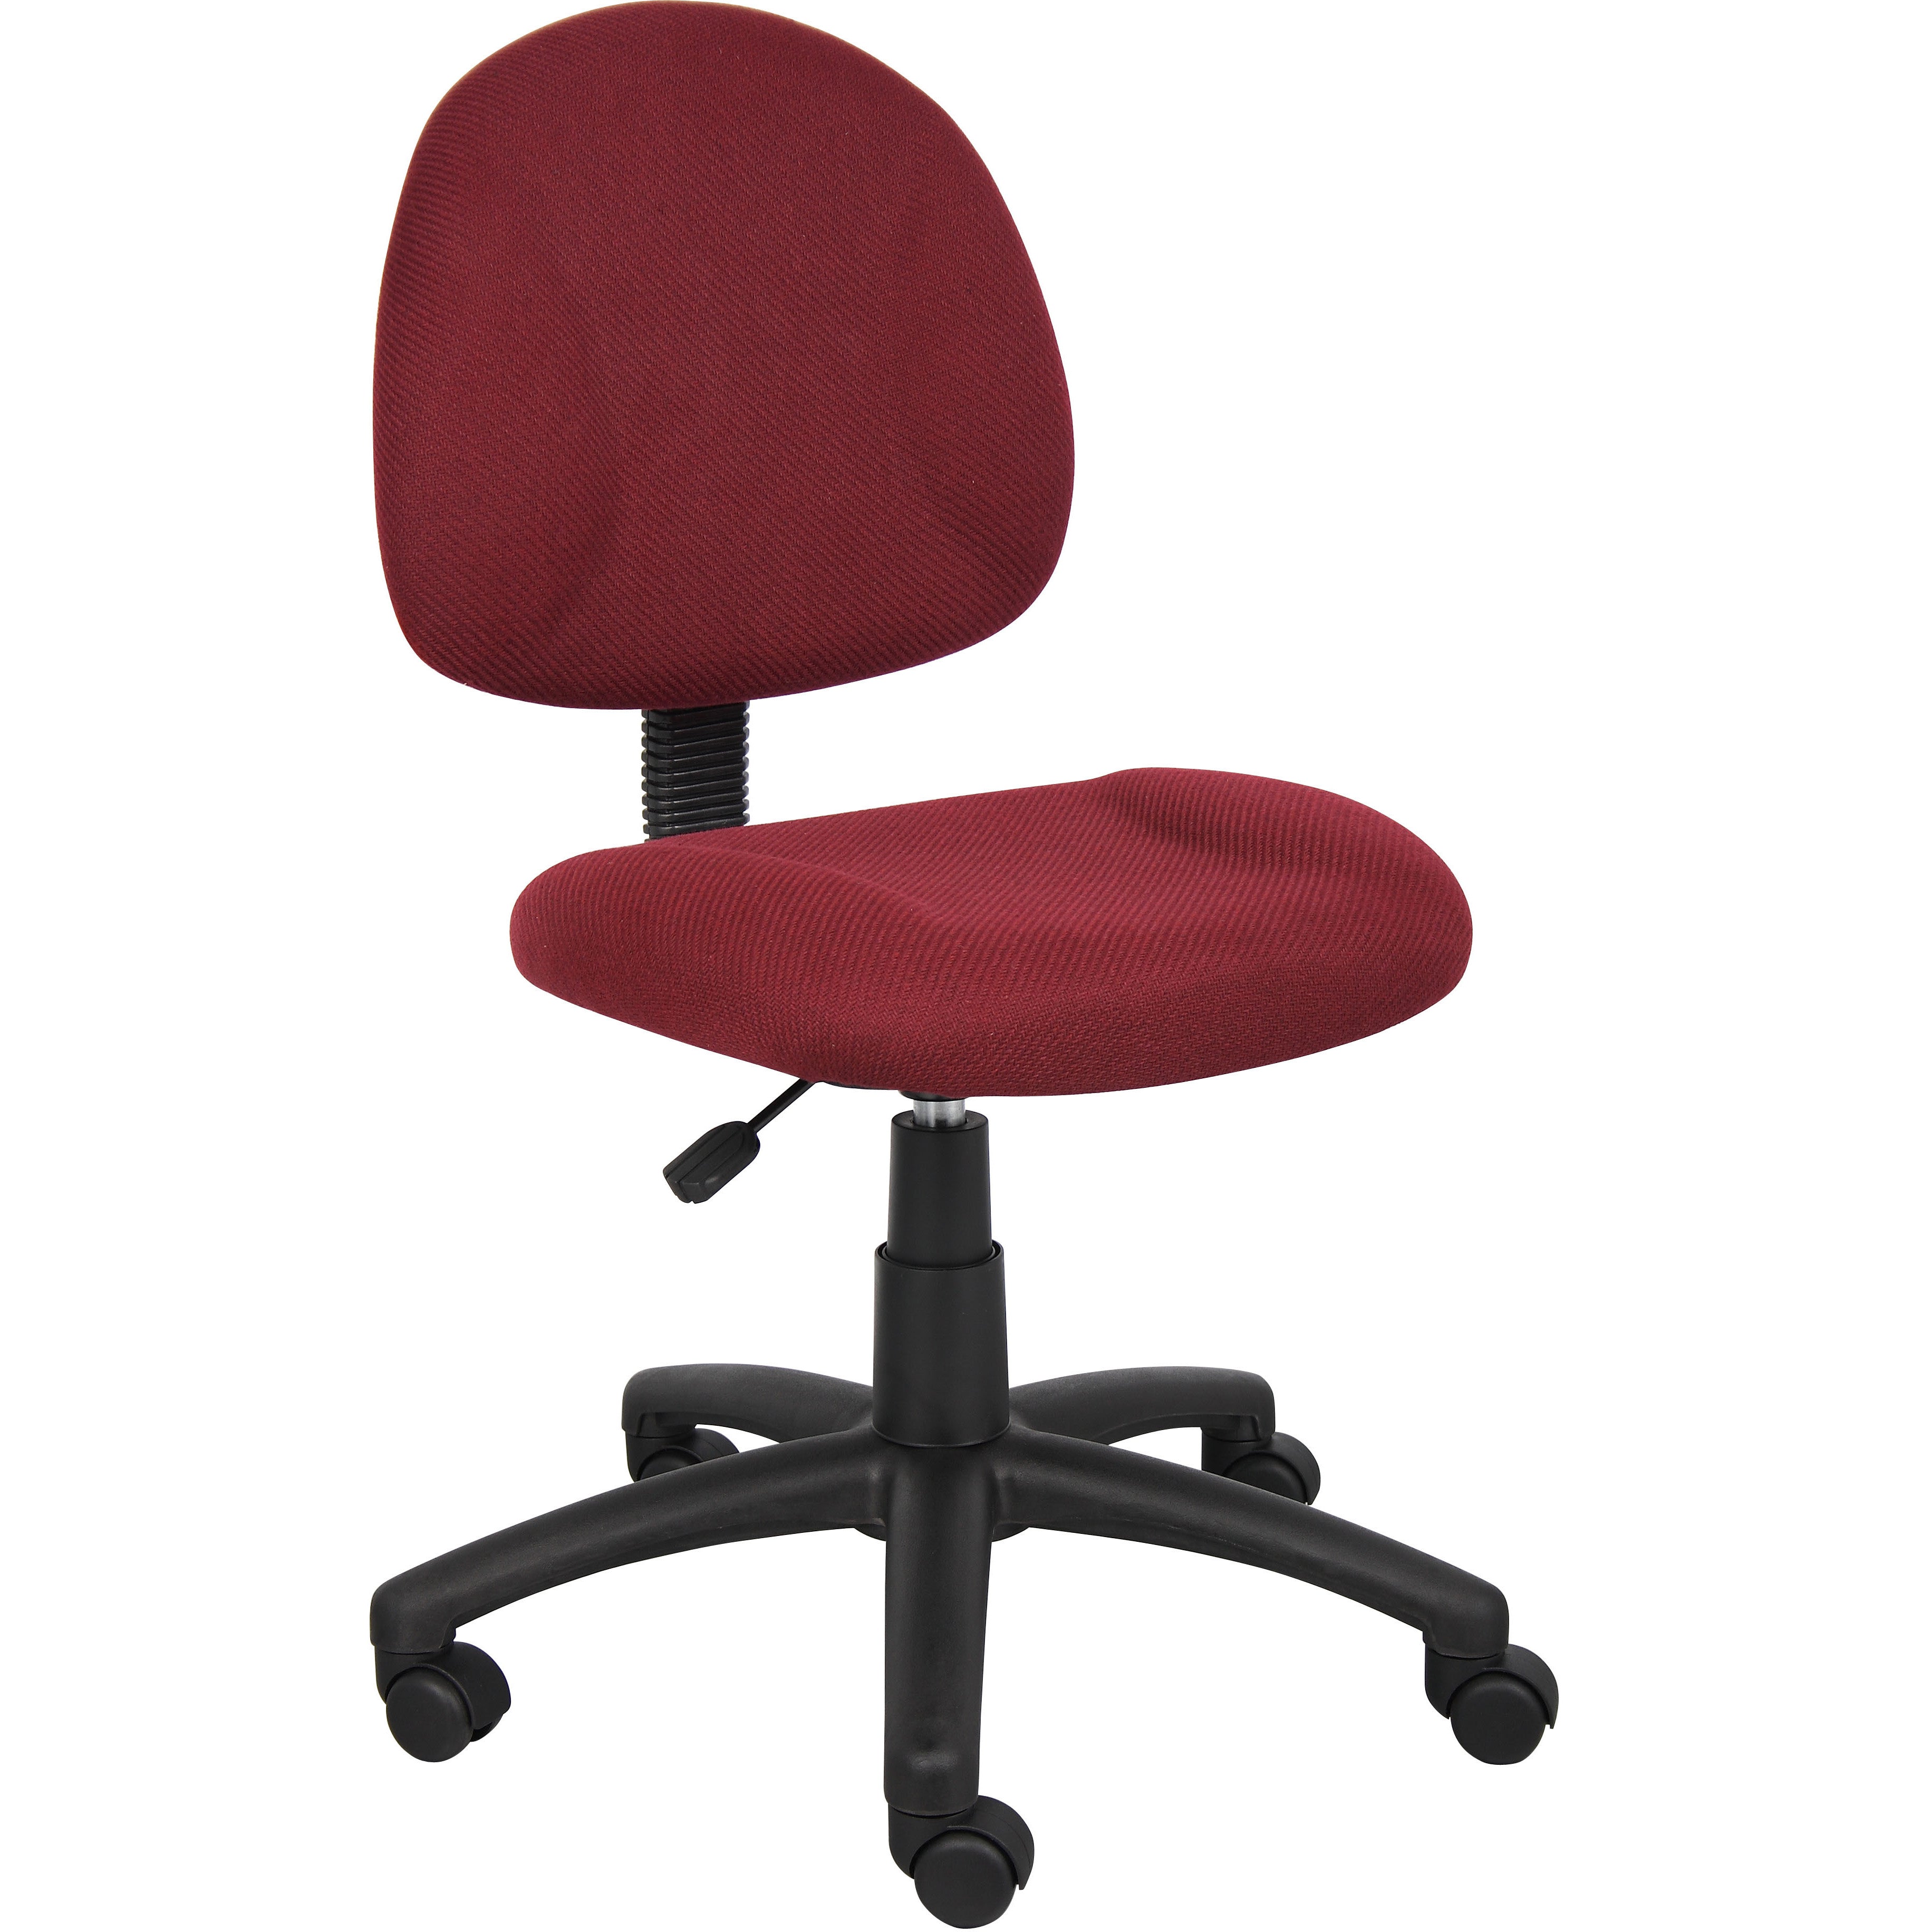 Burgundy Deluxe Posture Chair, B315-BY